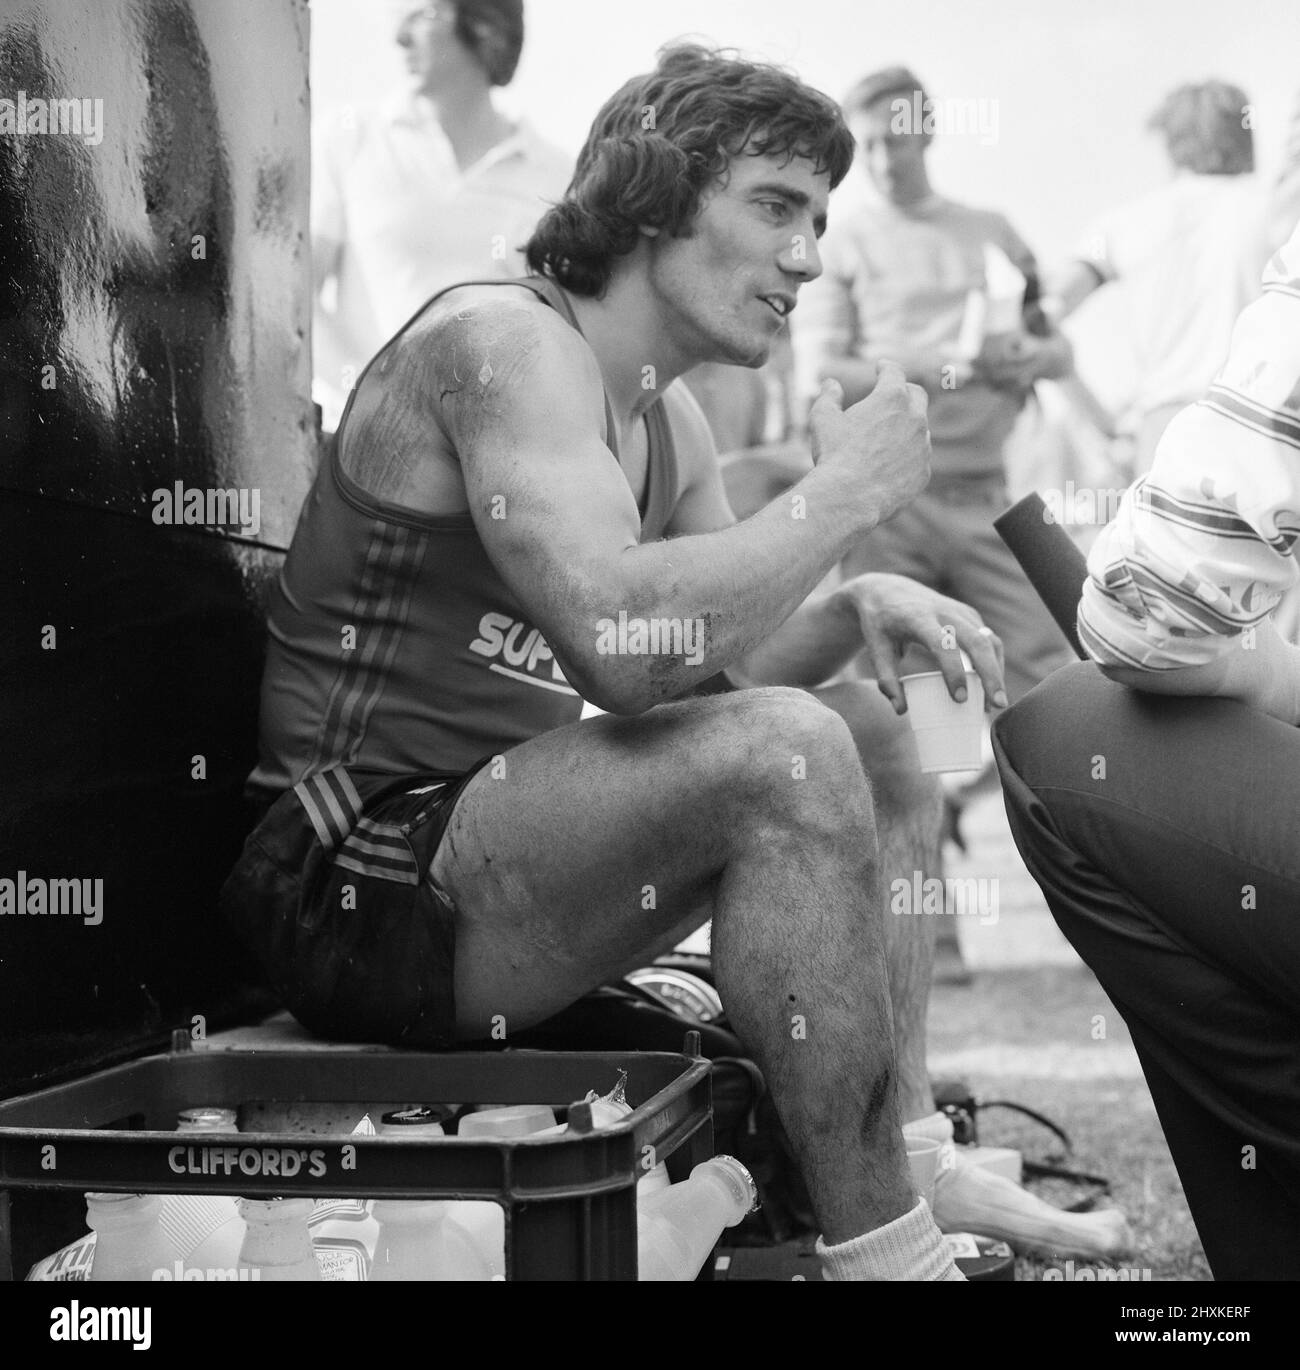 Superstars, BBC Television Programme, Filming of Heat in Bracknell, Berkshire, 25th June 1976. Liverpool Player, Kevin Keegan, his right shoulder, back, elbow, arm and leg, badly scraped, cut and bruised, after he toppled headlong on to the cinder track during cycle race. Stock Photo